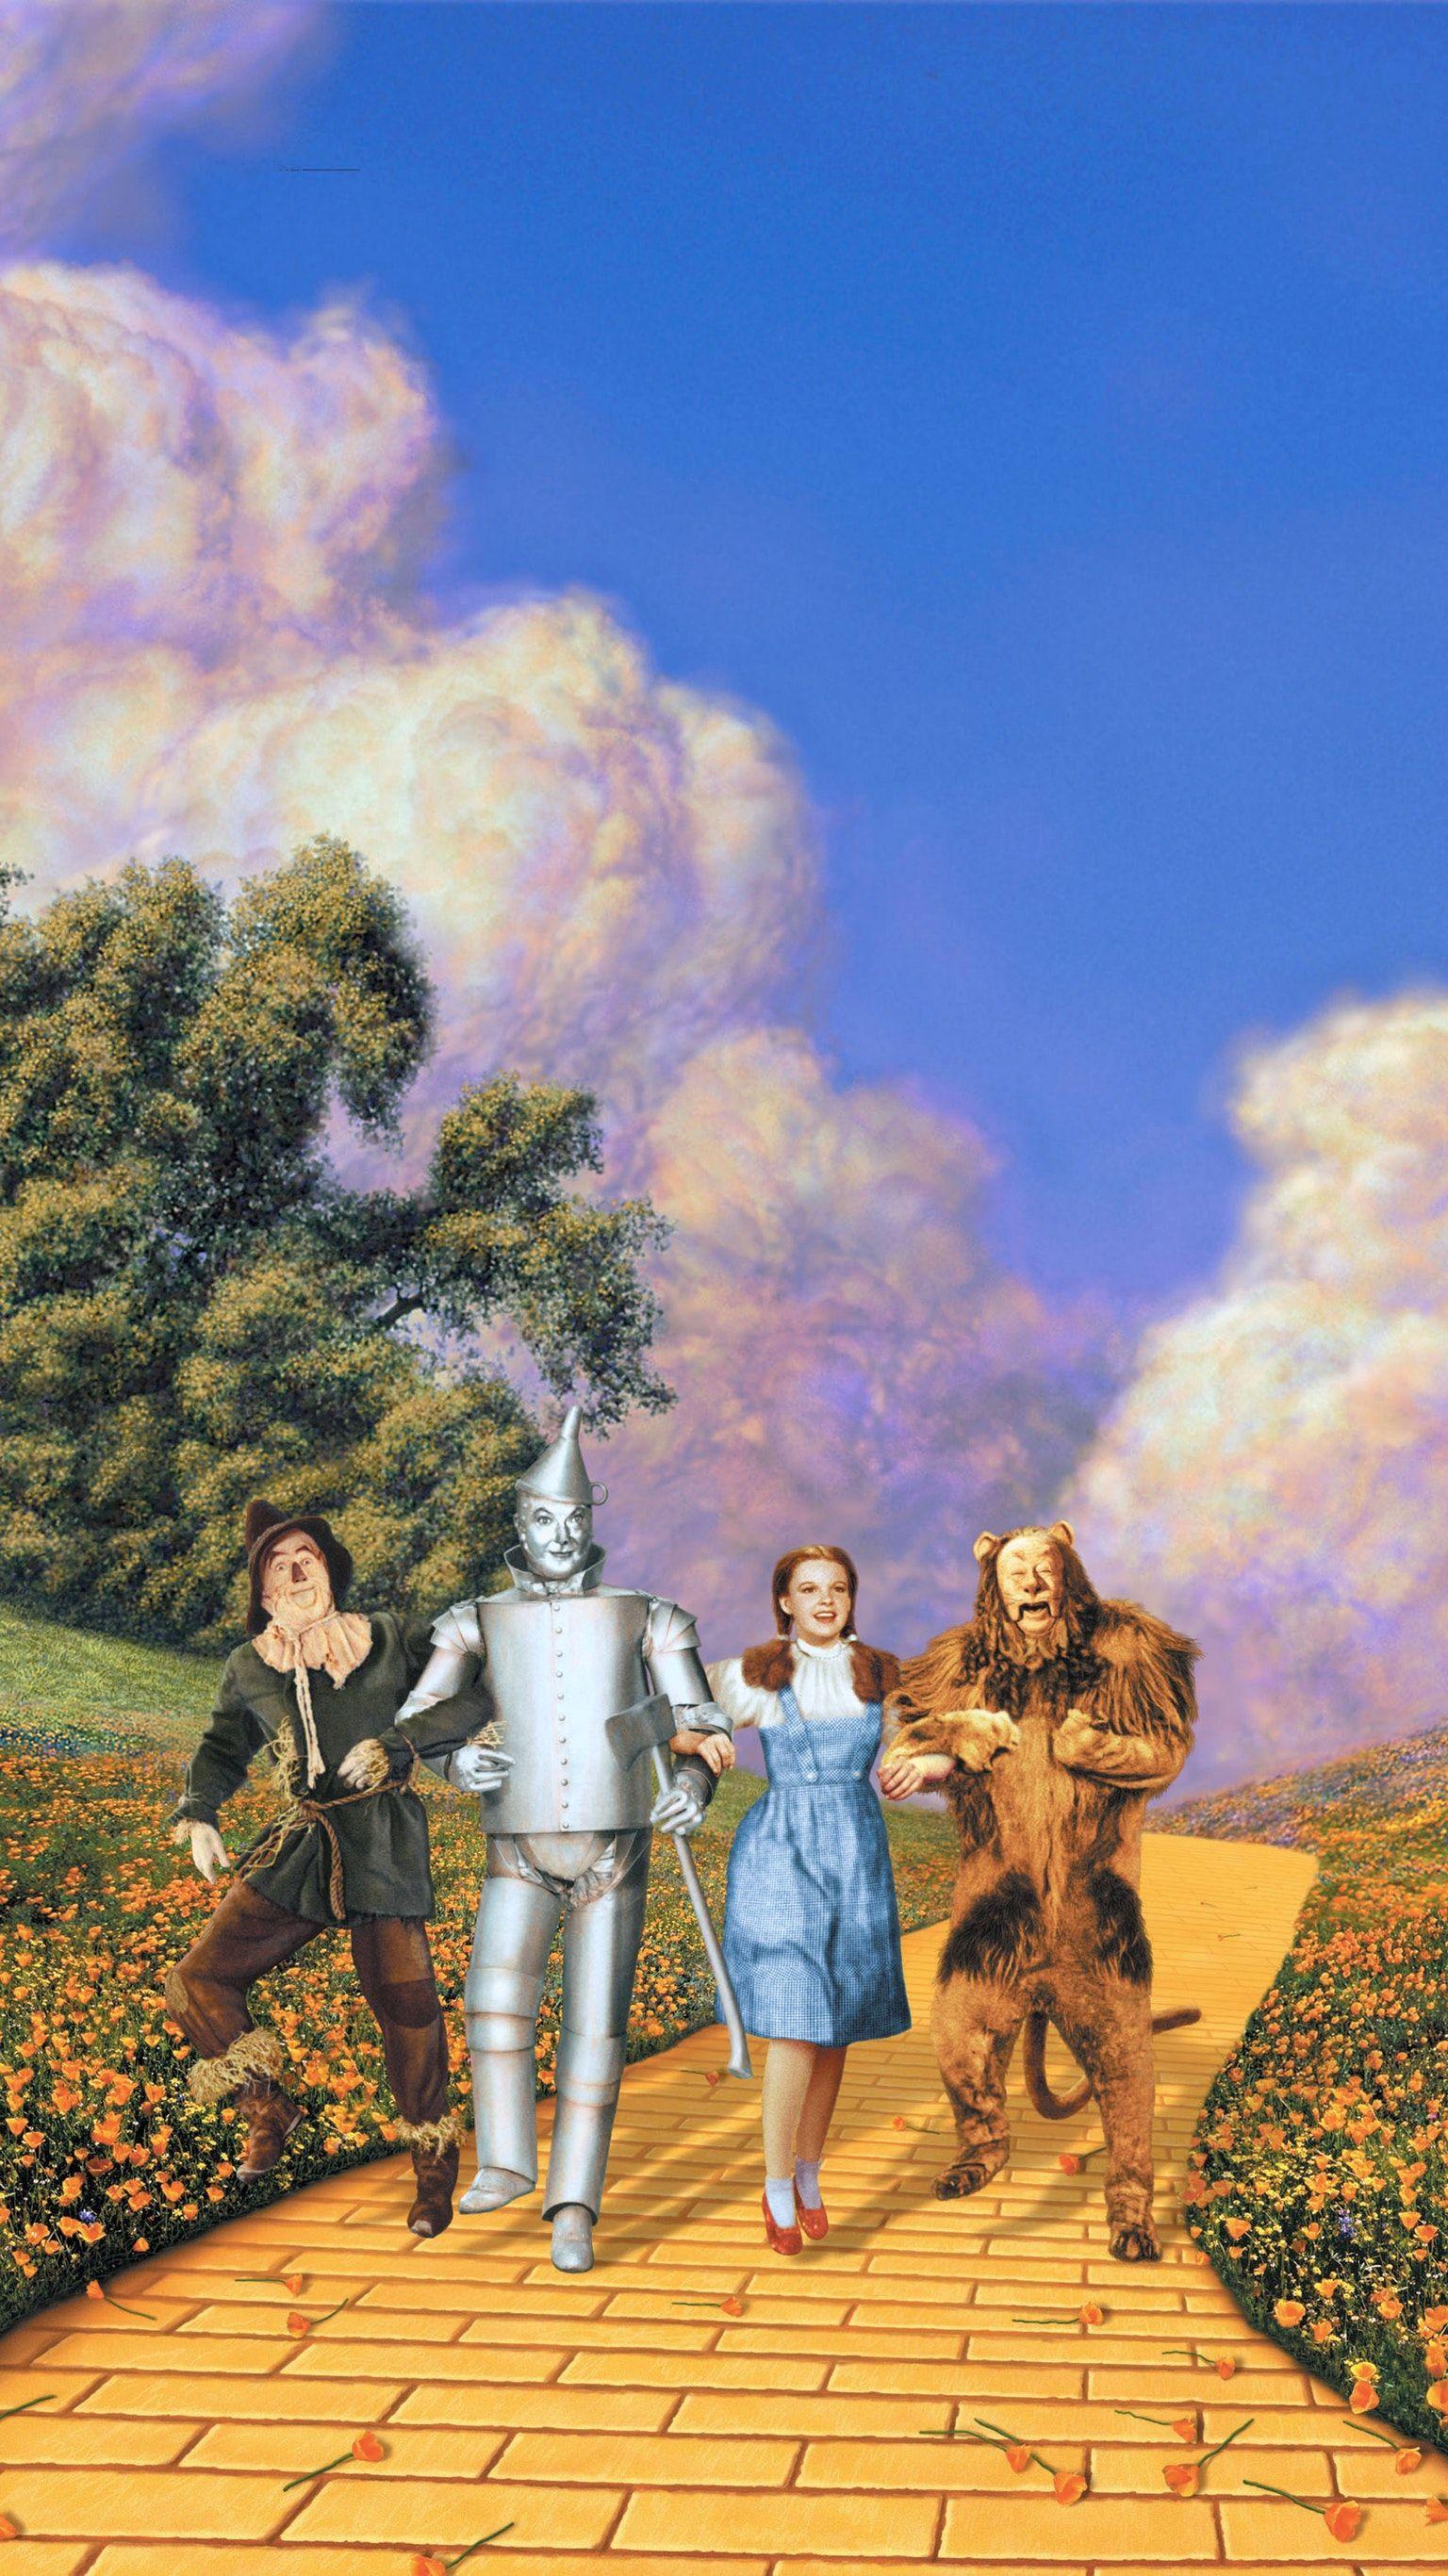 The Wizard of Oz (1939) Phone Wallpaper. Wizard of oz